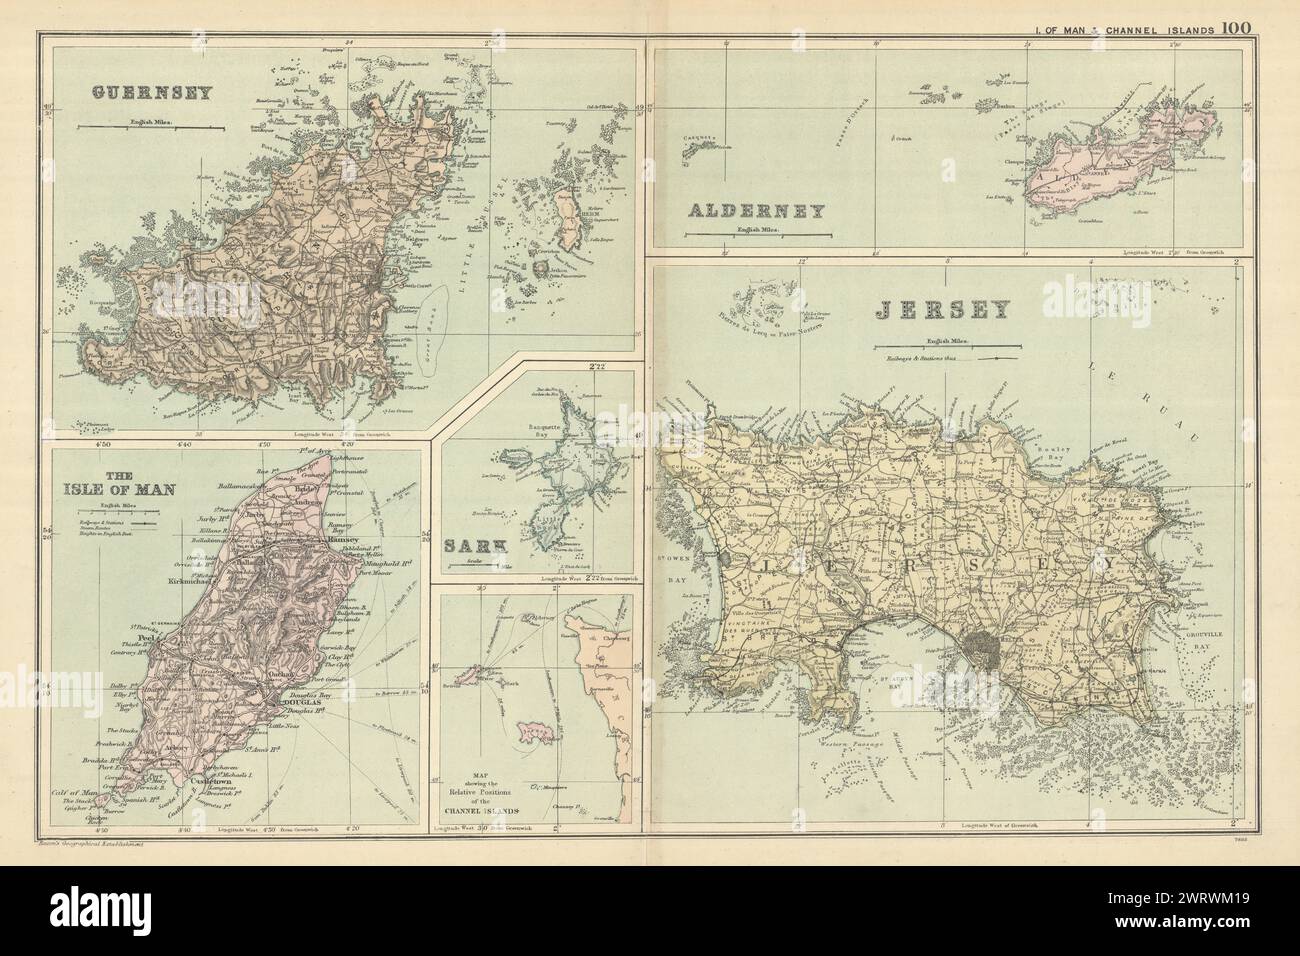 CHANNEL ISLANDS & ISLE OF MAN Alderney Guernsey Jersey Sark by GW BACON 1898 map Stock Photo